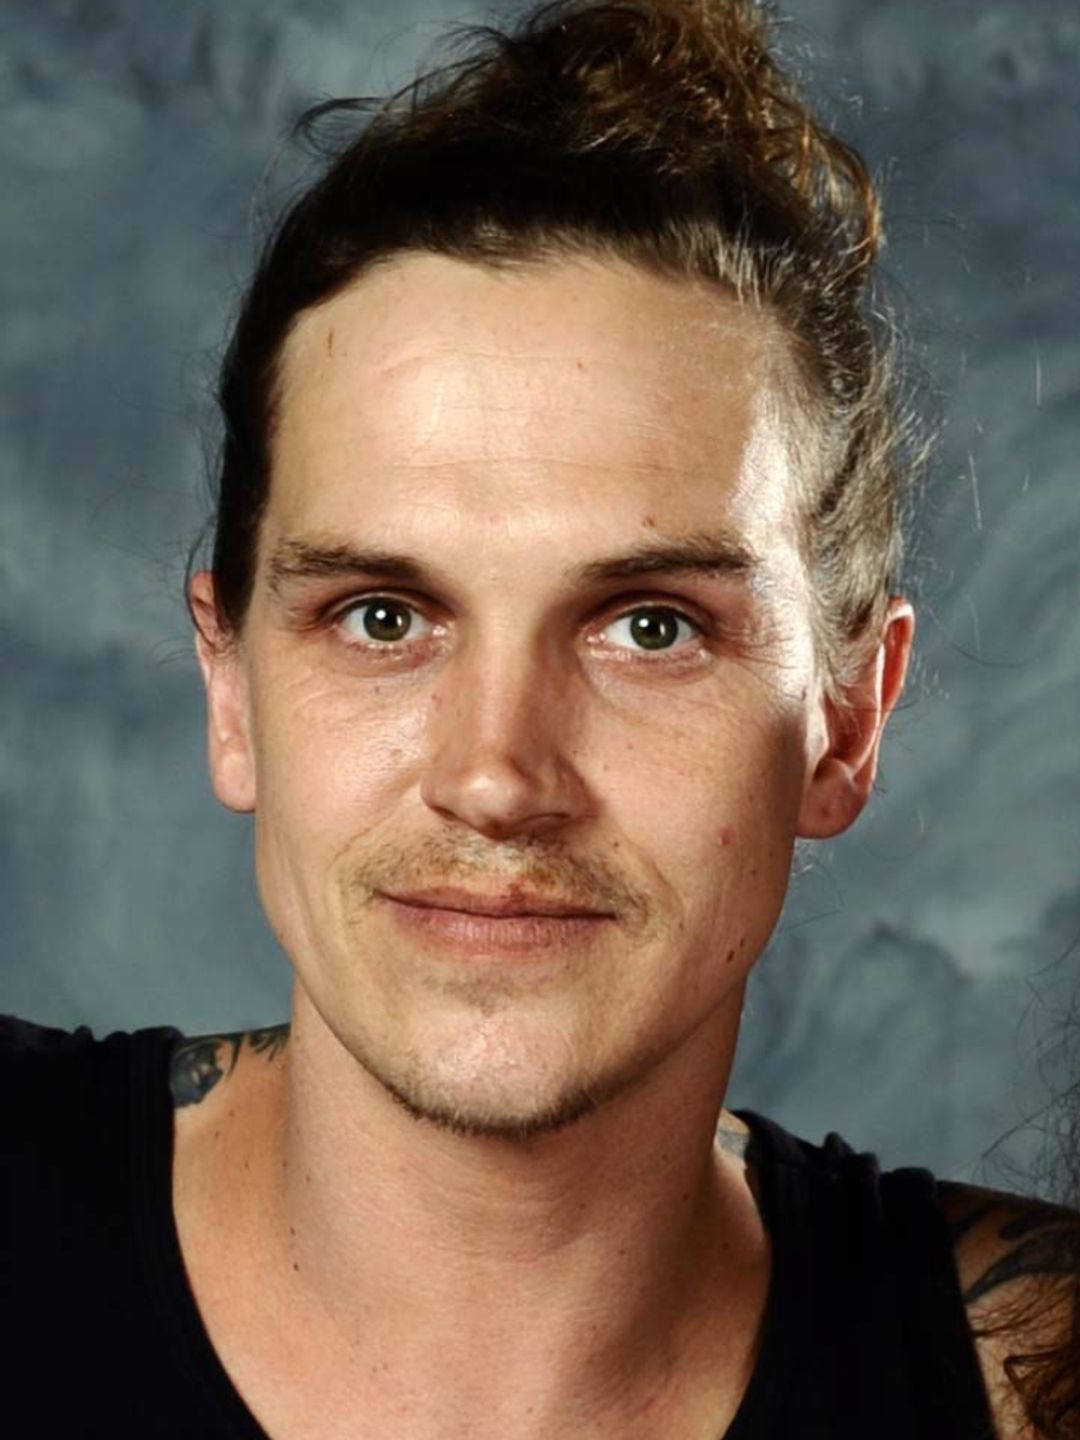 Jason Mewes in his youth